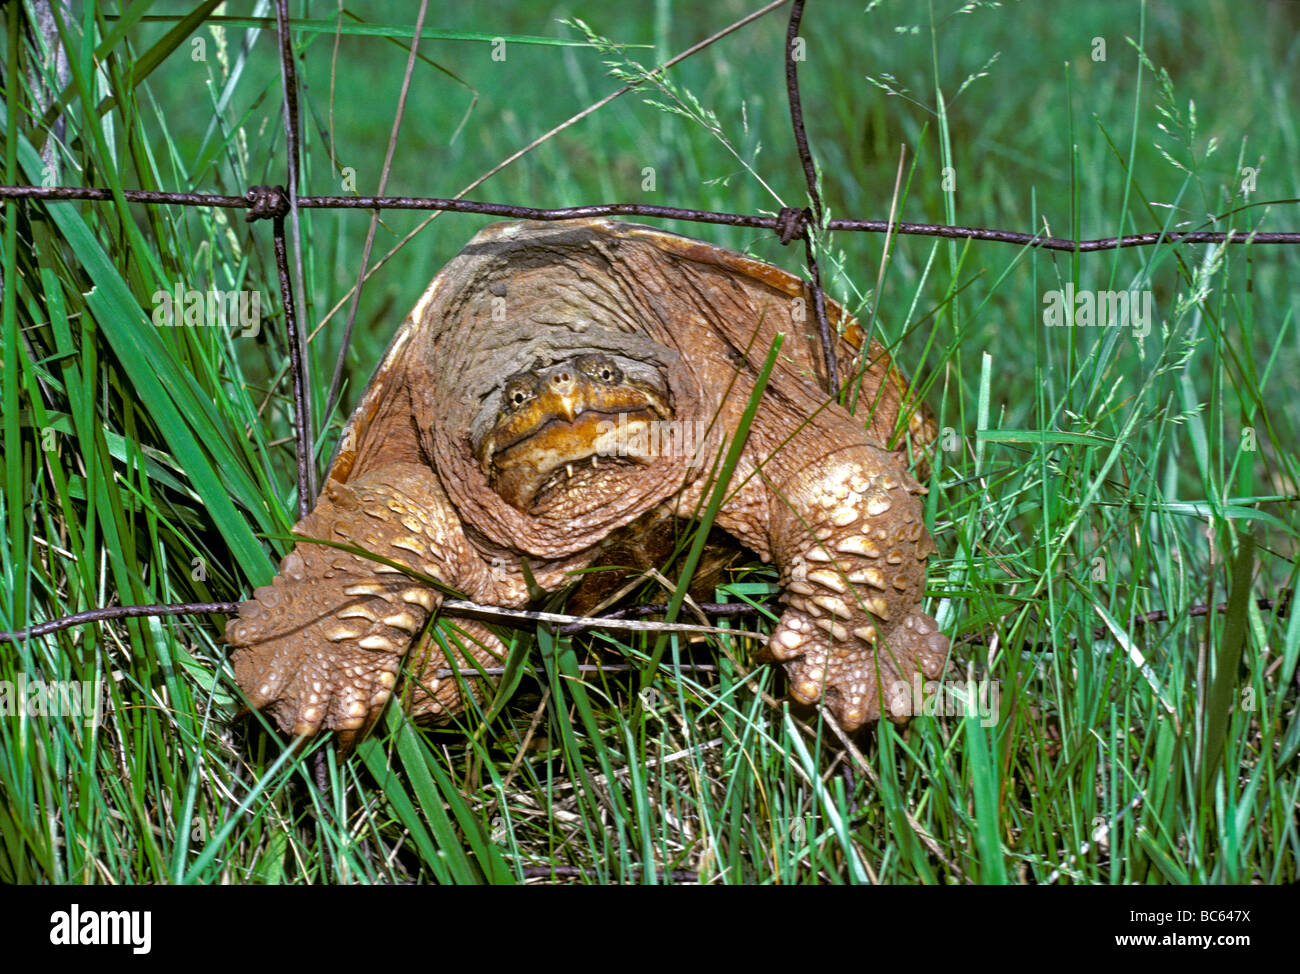 Old determined snapping turtle climbing through wire fence in field, Midwest USA Stock Photo